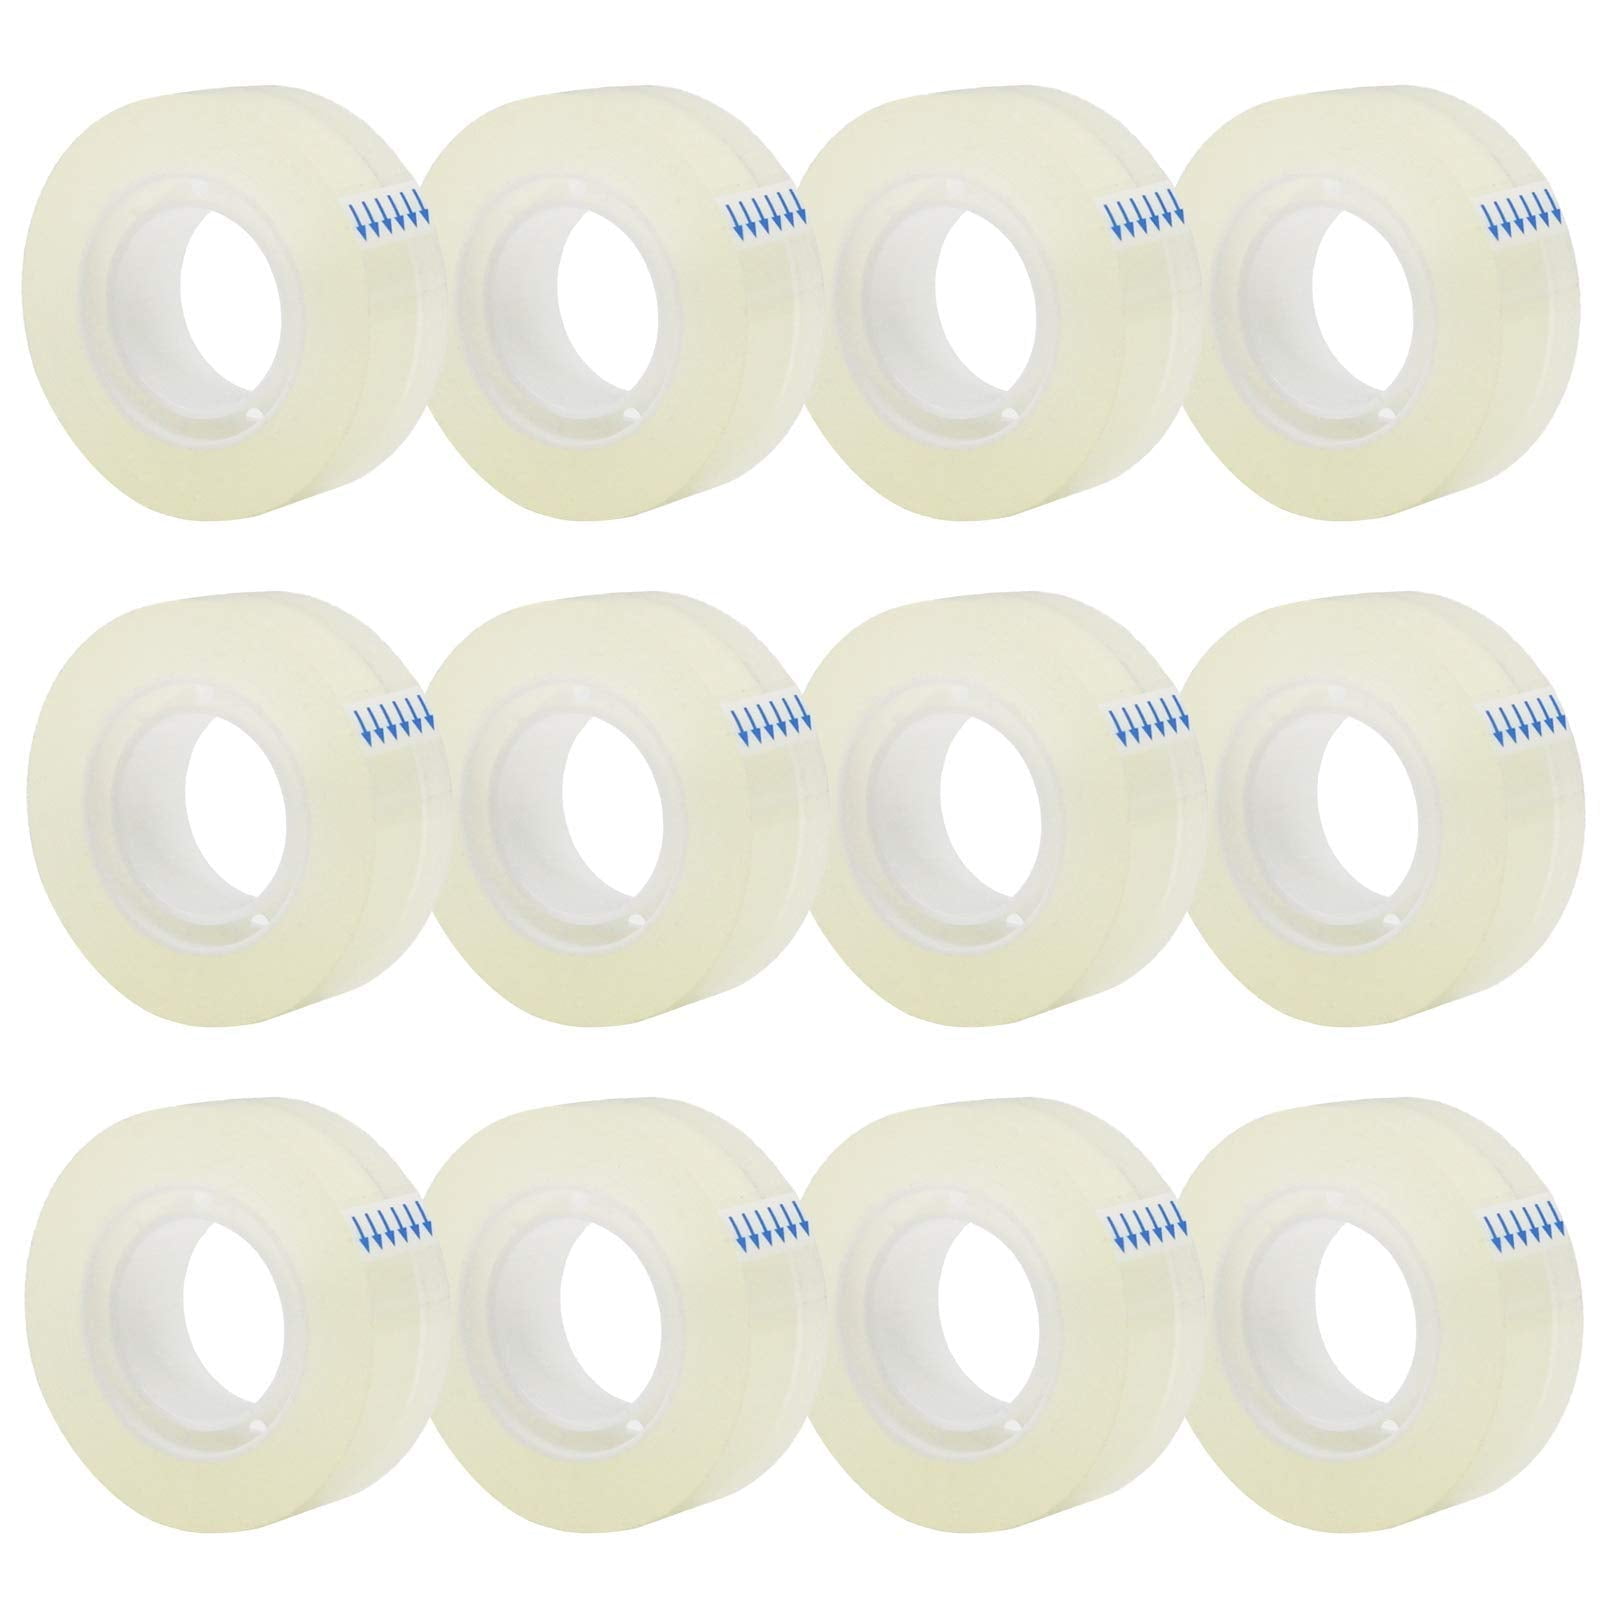 OWLKELA 12 Rolls Transparent Tape Refills, Clear Tape, All-Purpose Transparent Glossy Tape for Office, Home, School